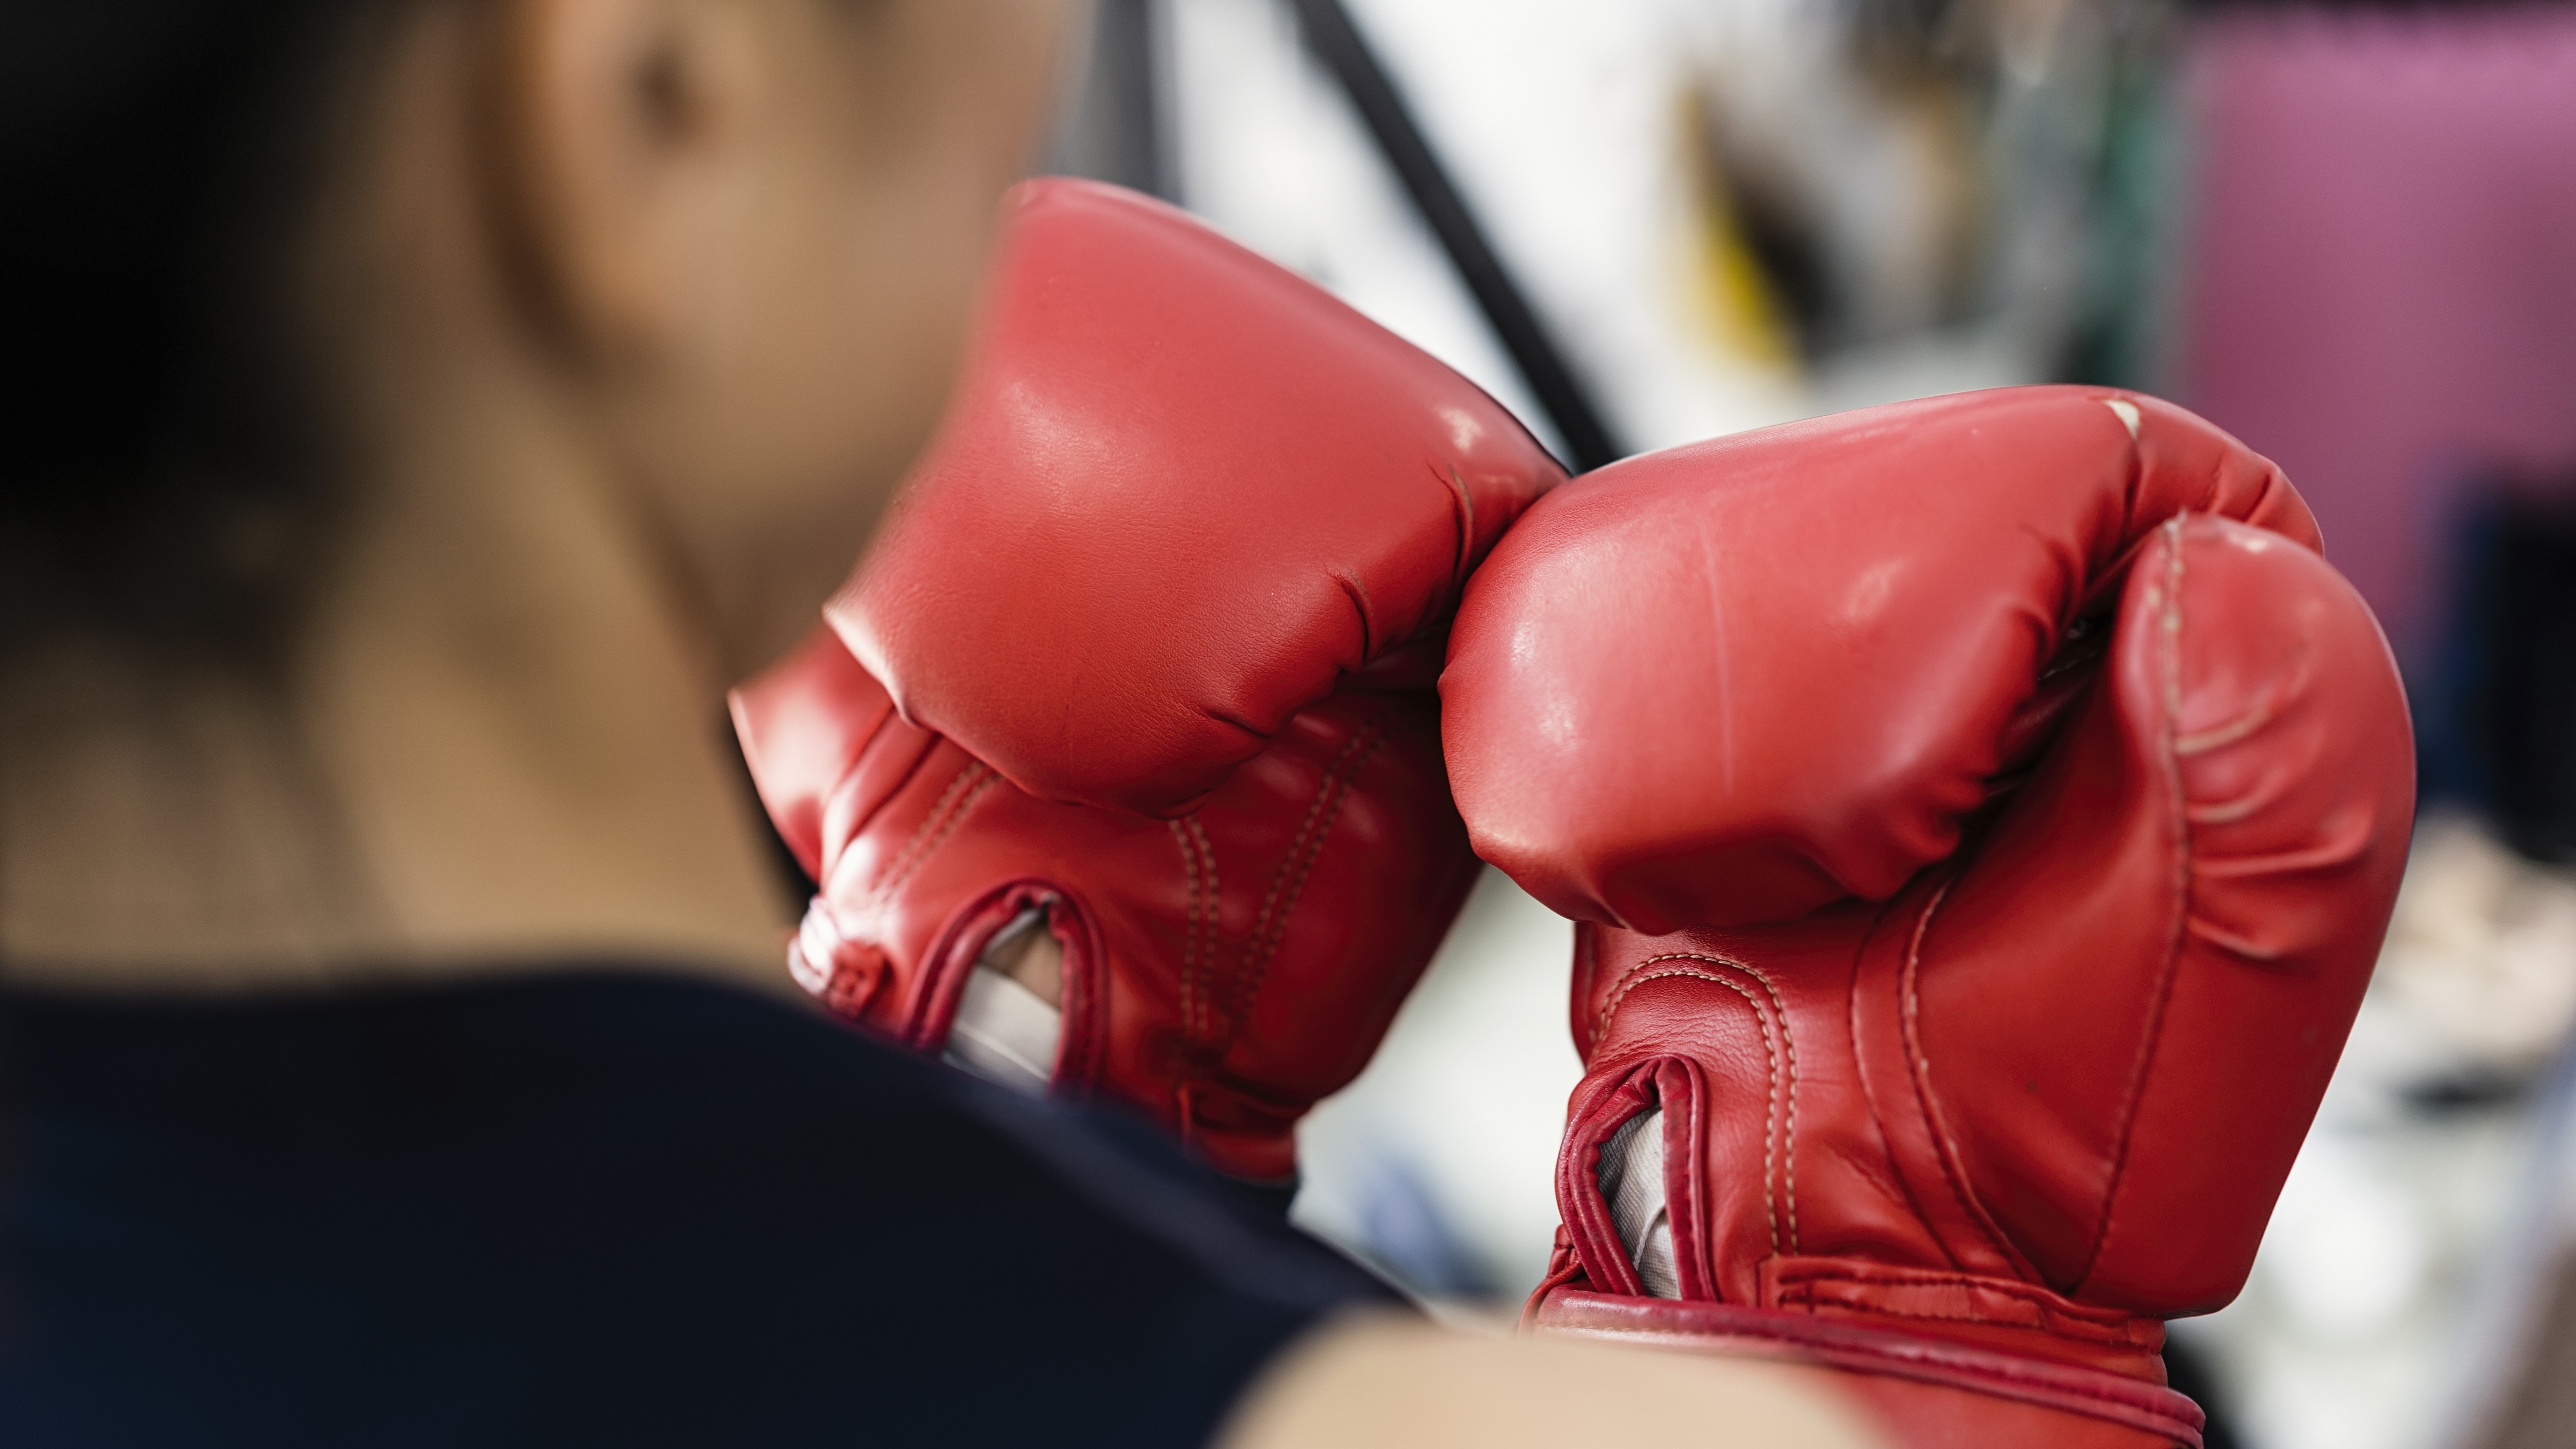 Boxing for women pic